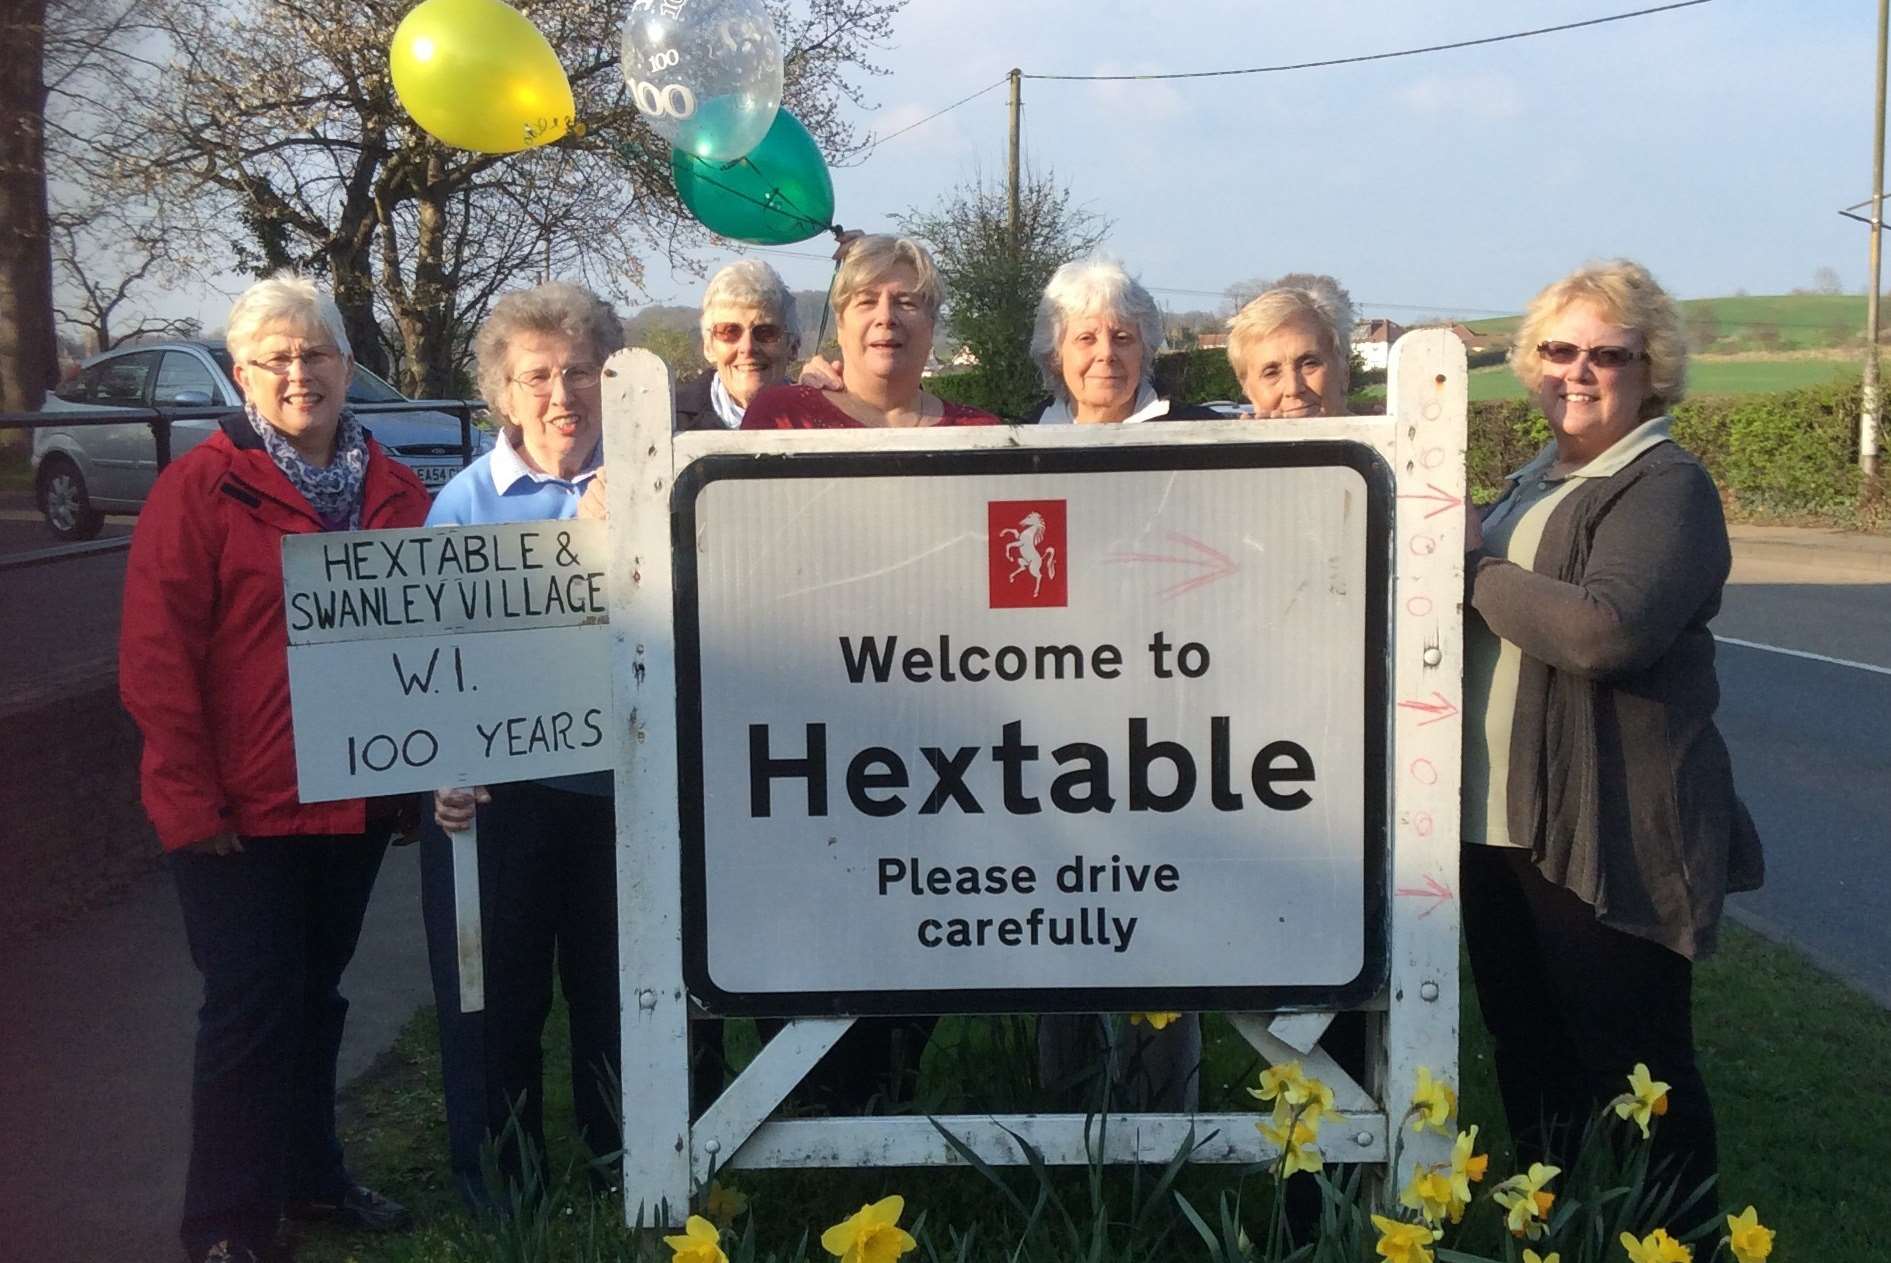 Hextable and Swanley Women's Institute is 100 years old